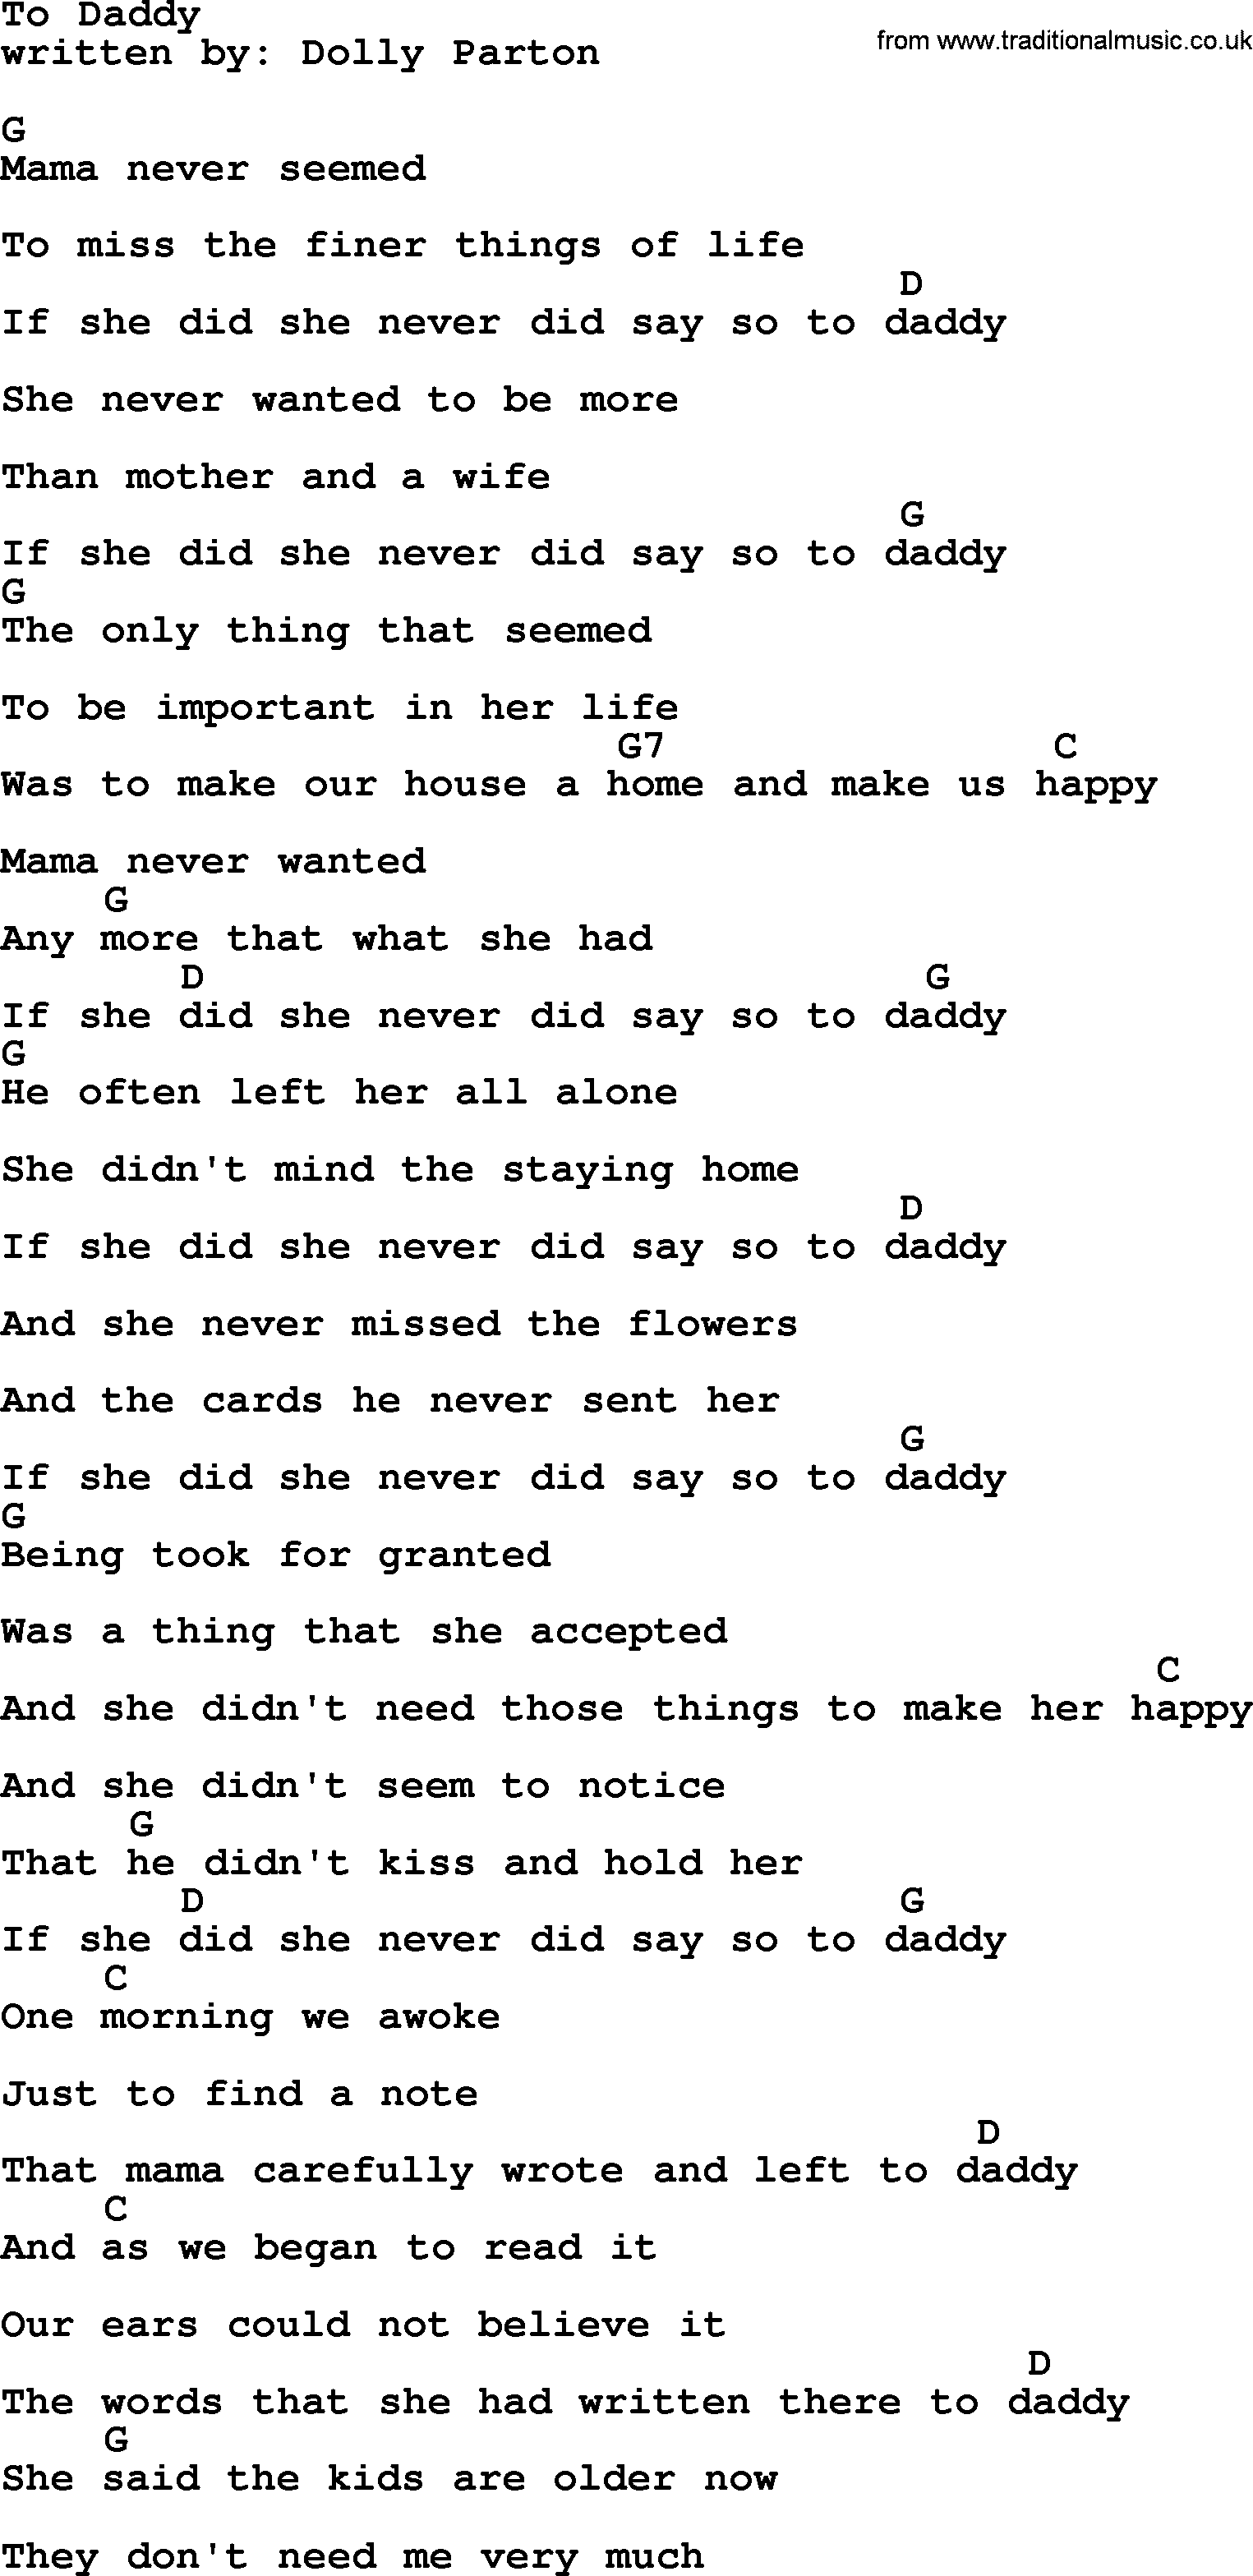 Emmylou Harris song: To Daddy lyrics and chords